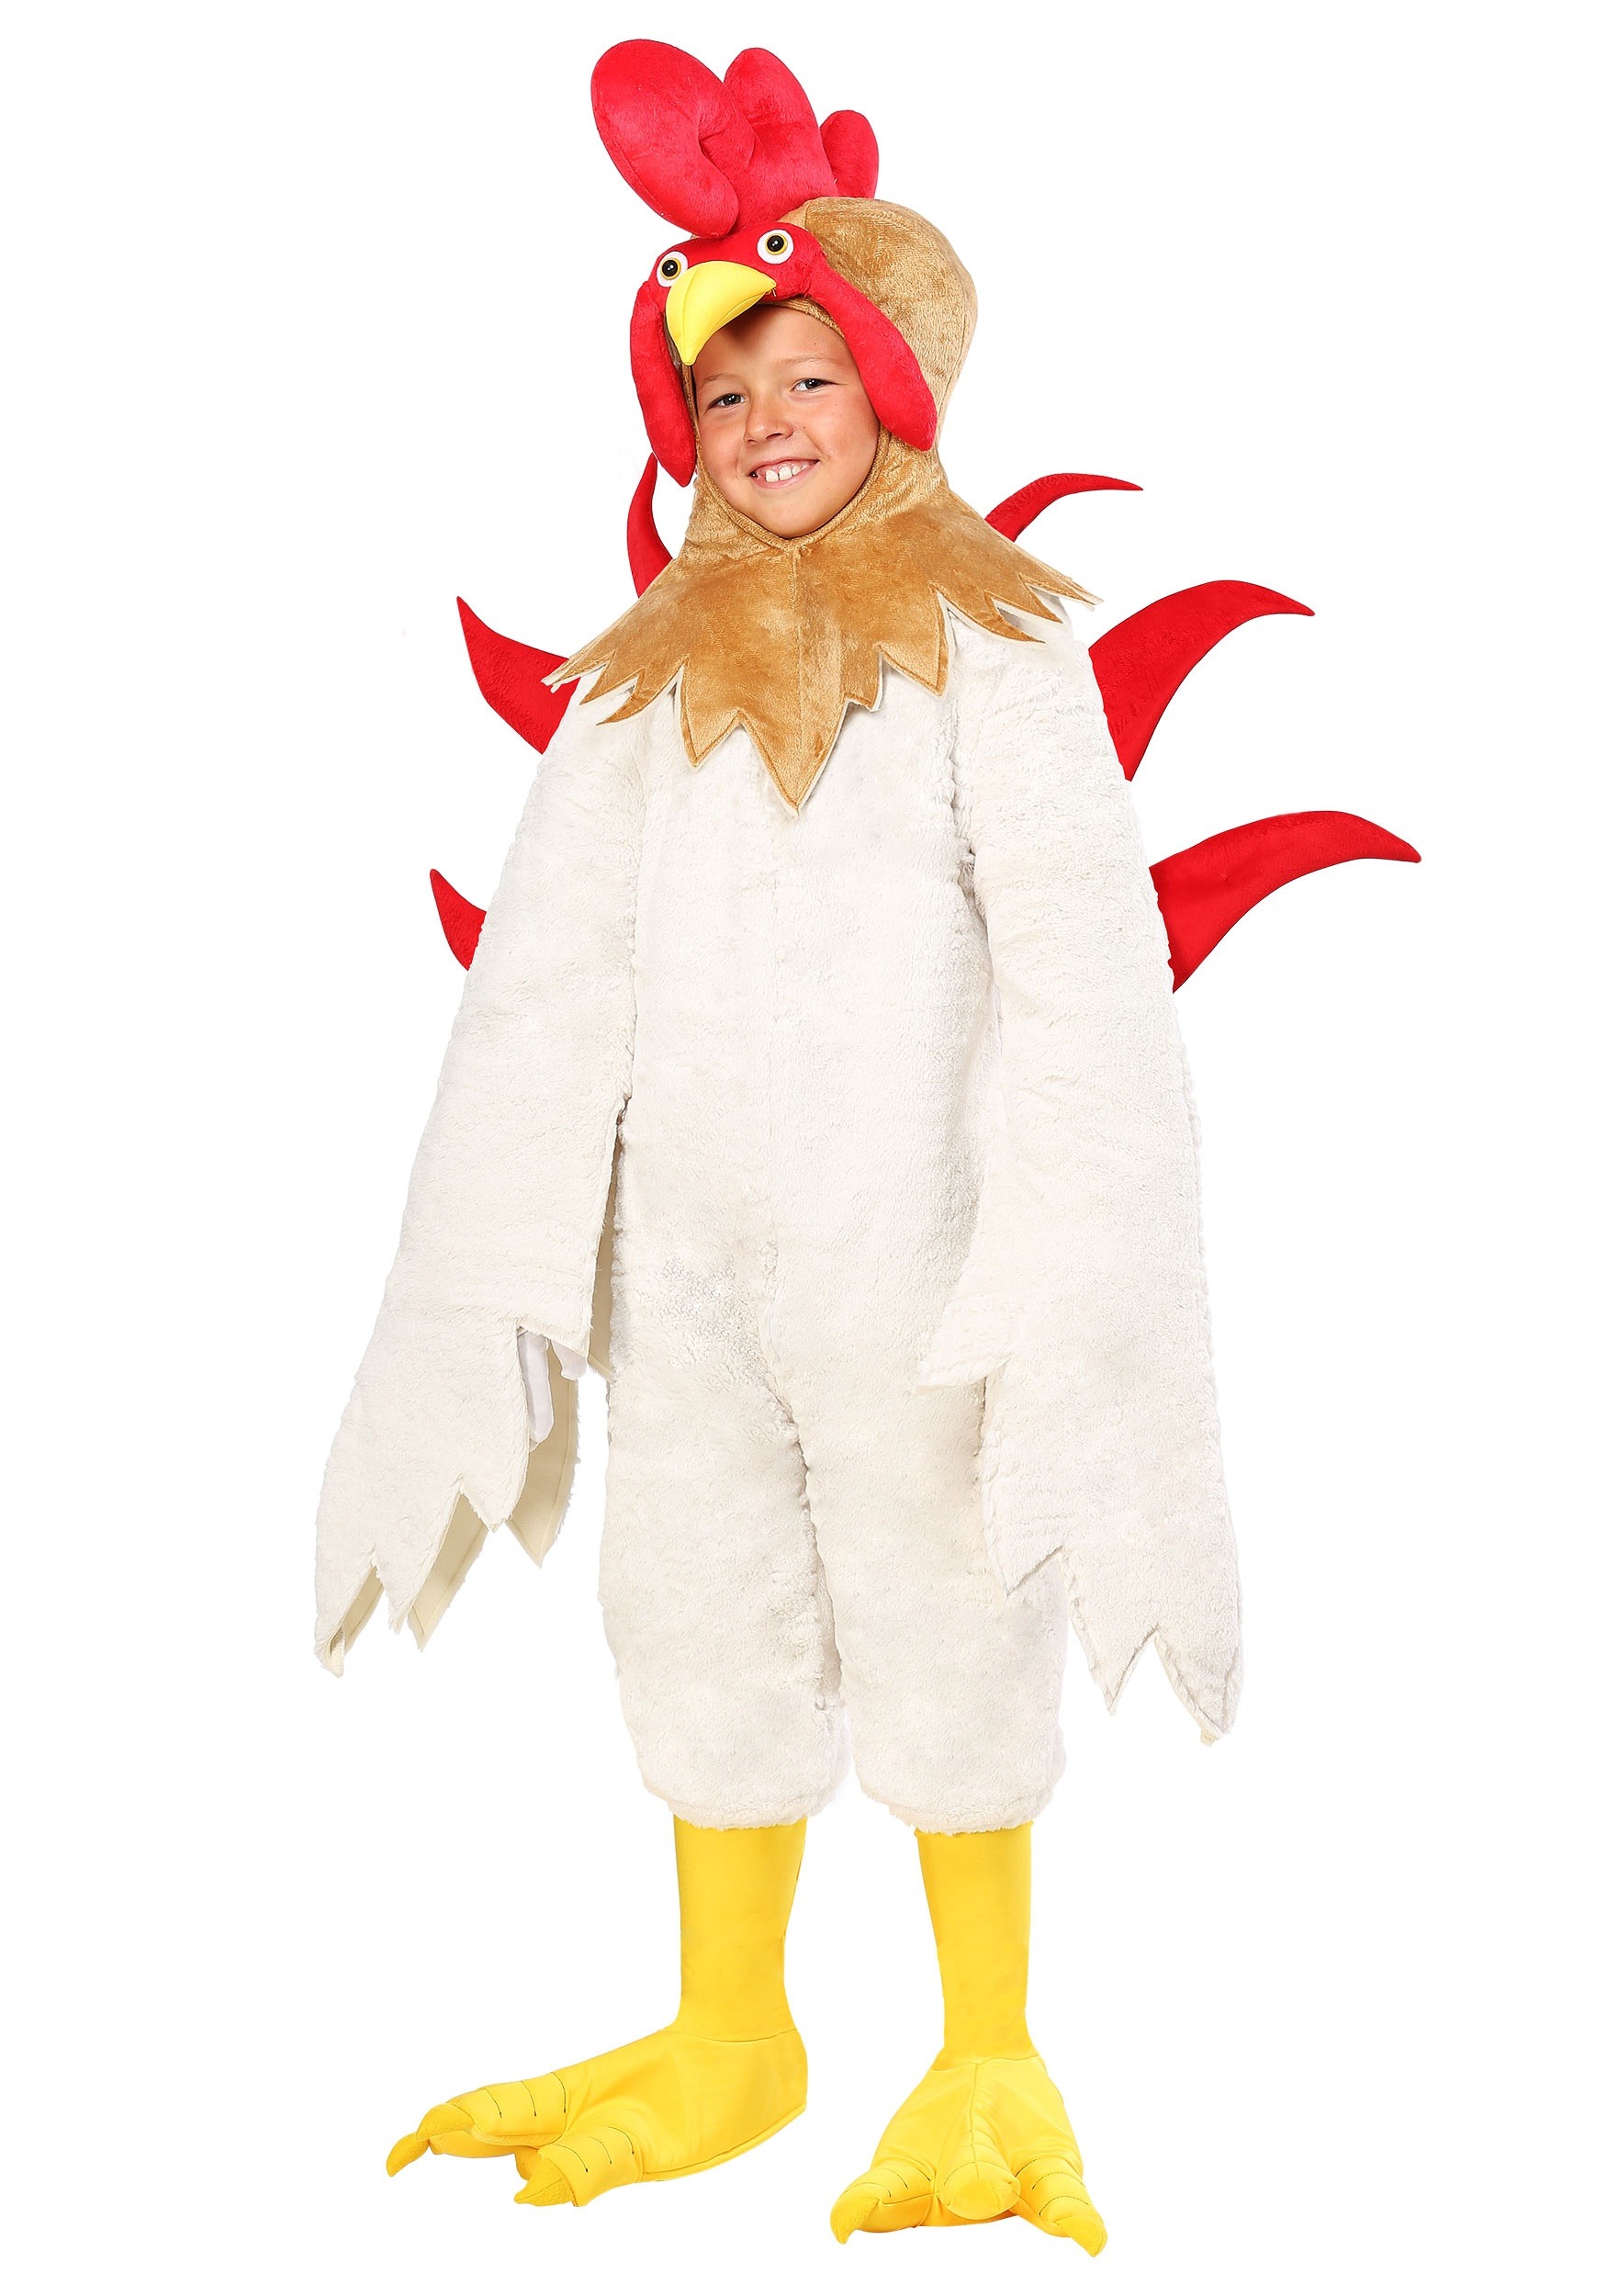 Photos - Fancy Dress FUN Costumes Rooster Costume for Kids Red/Beige/White